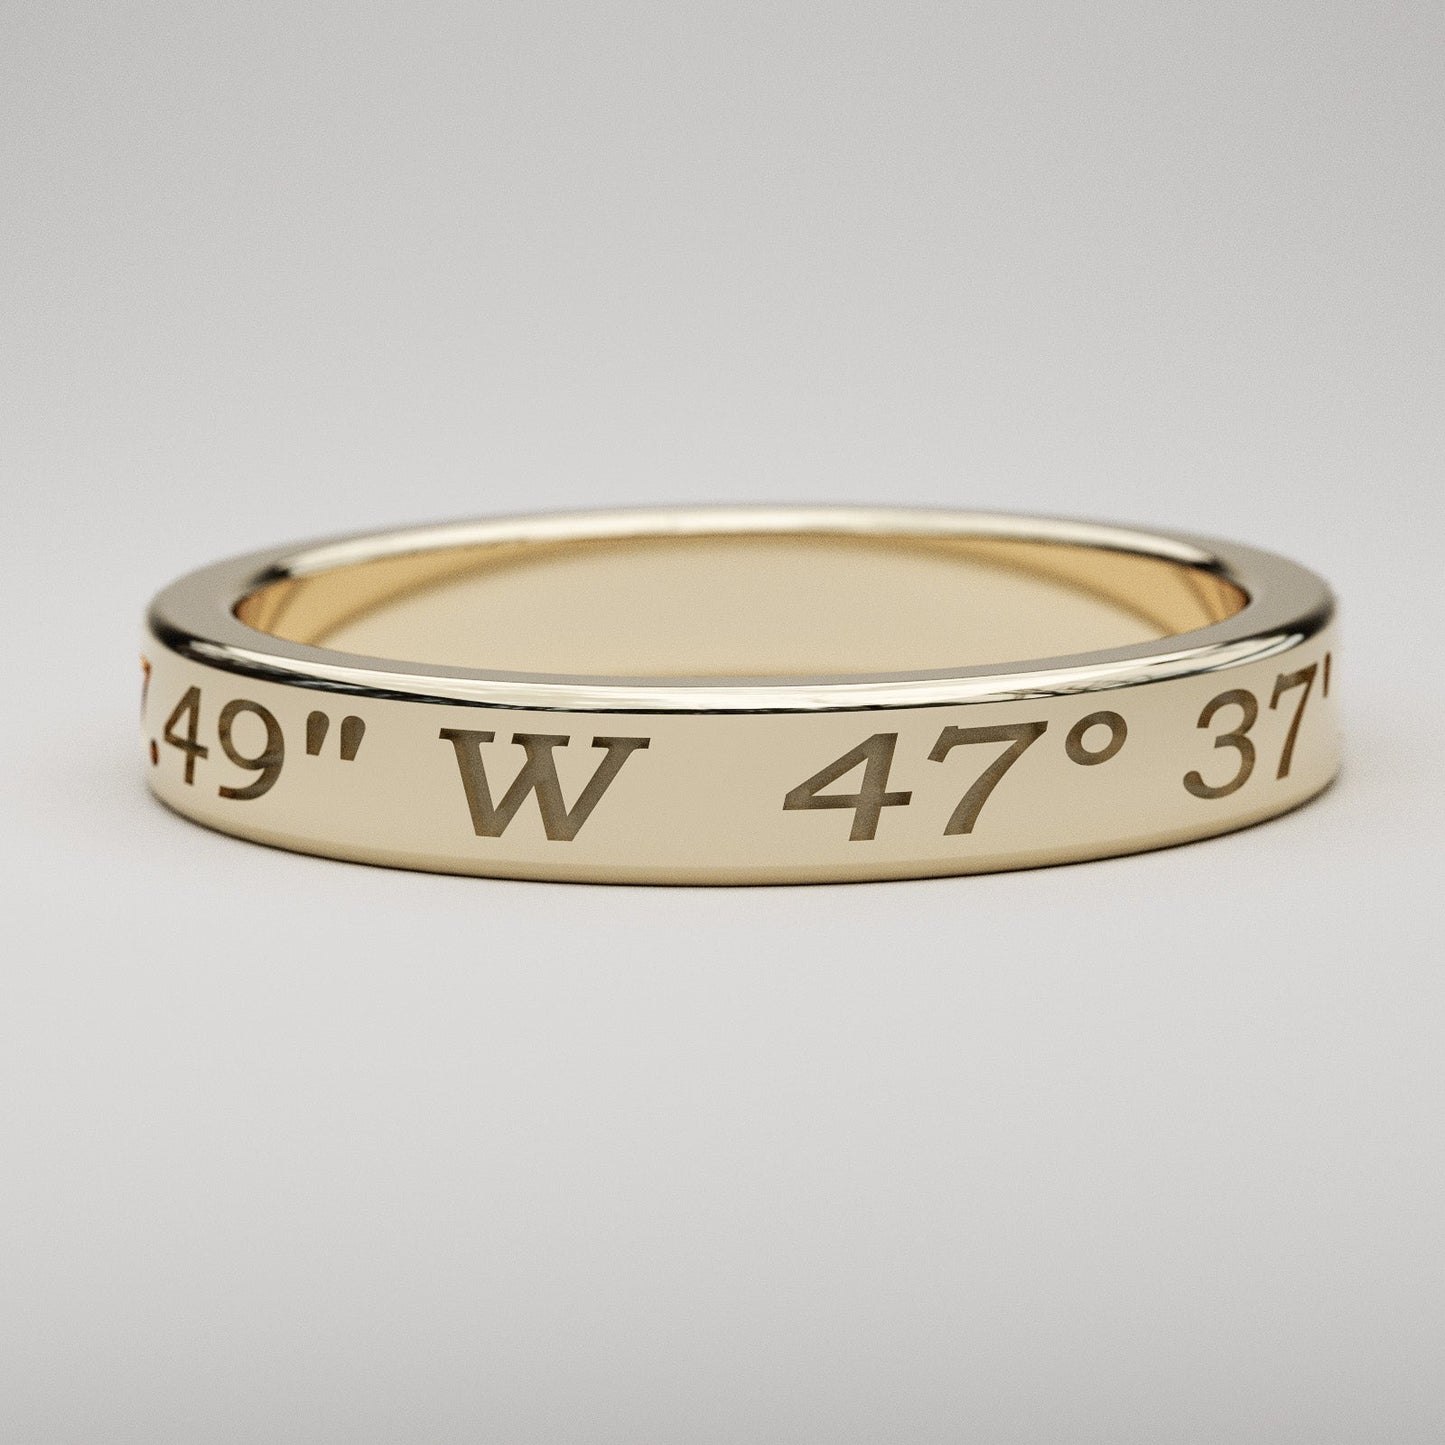 Engraved style custom coordinates ring in yellow gold